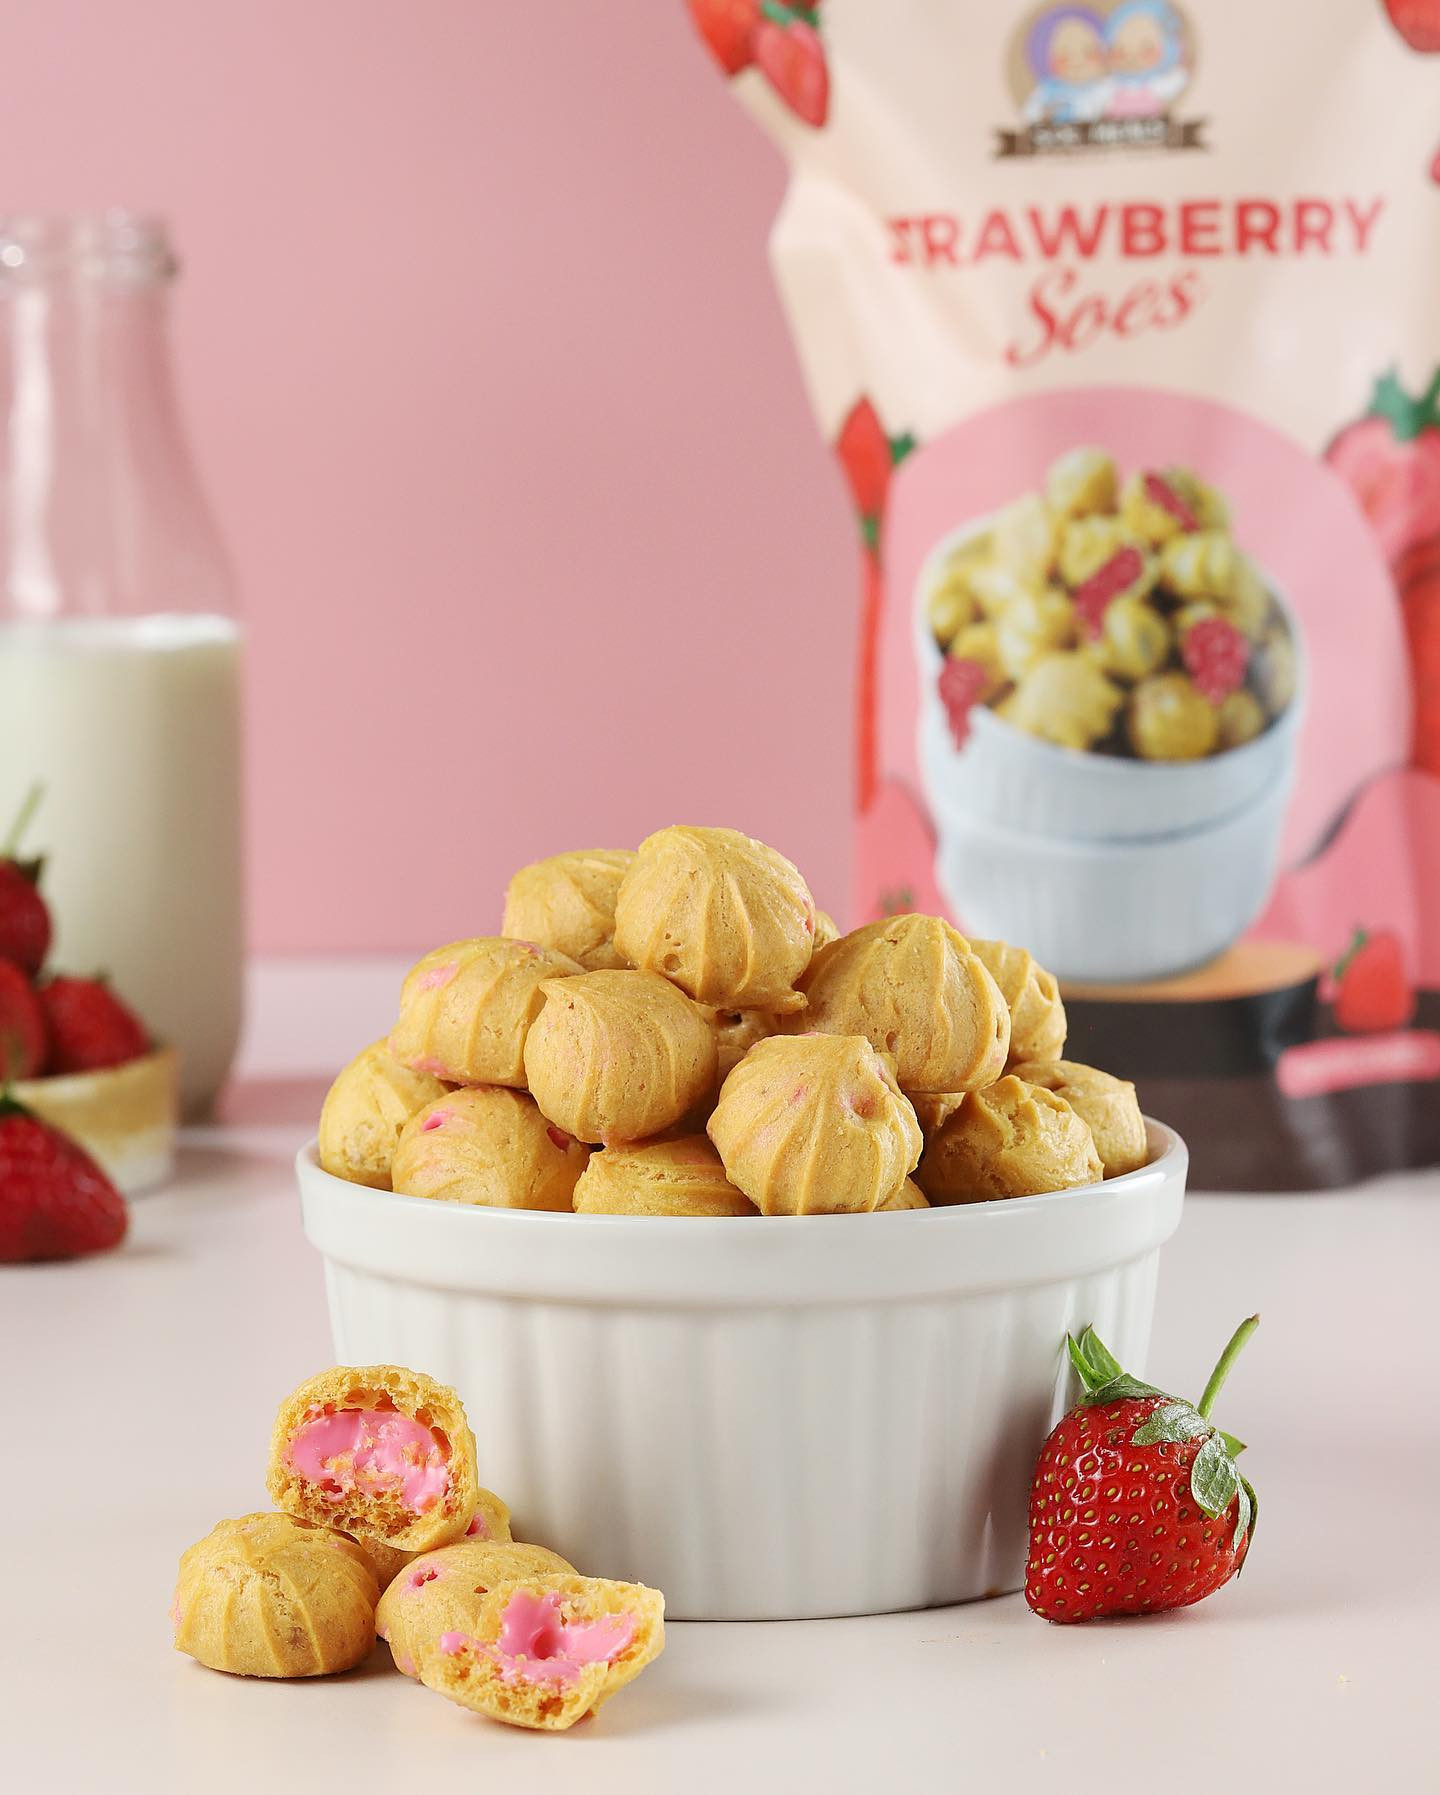 Strawberry Soes